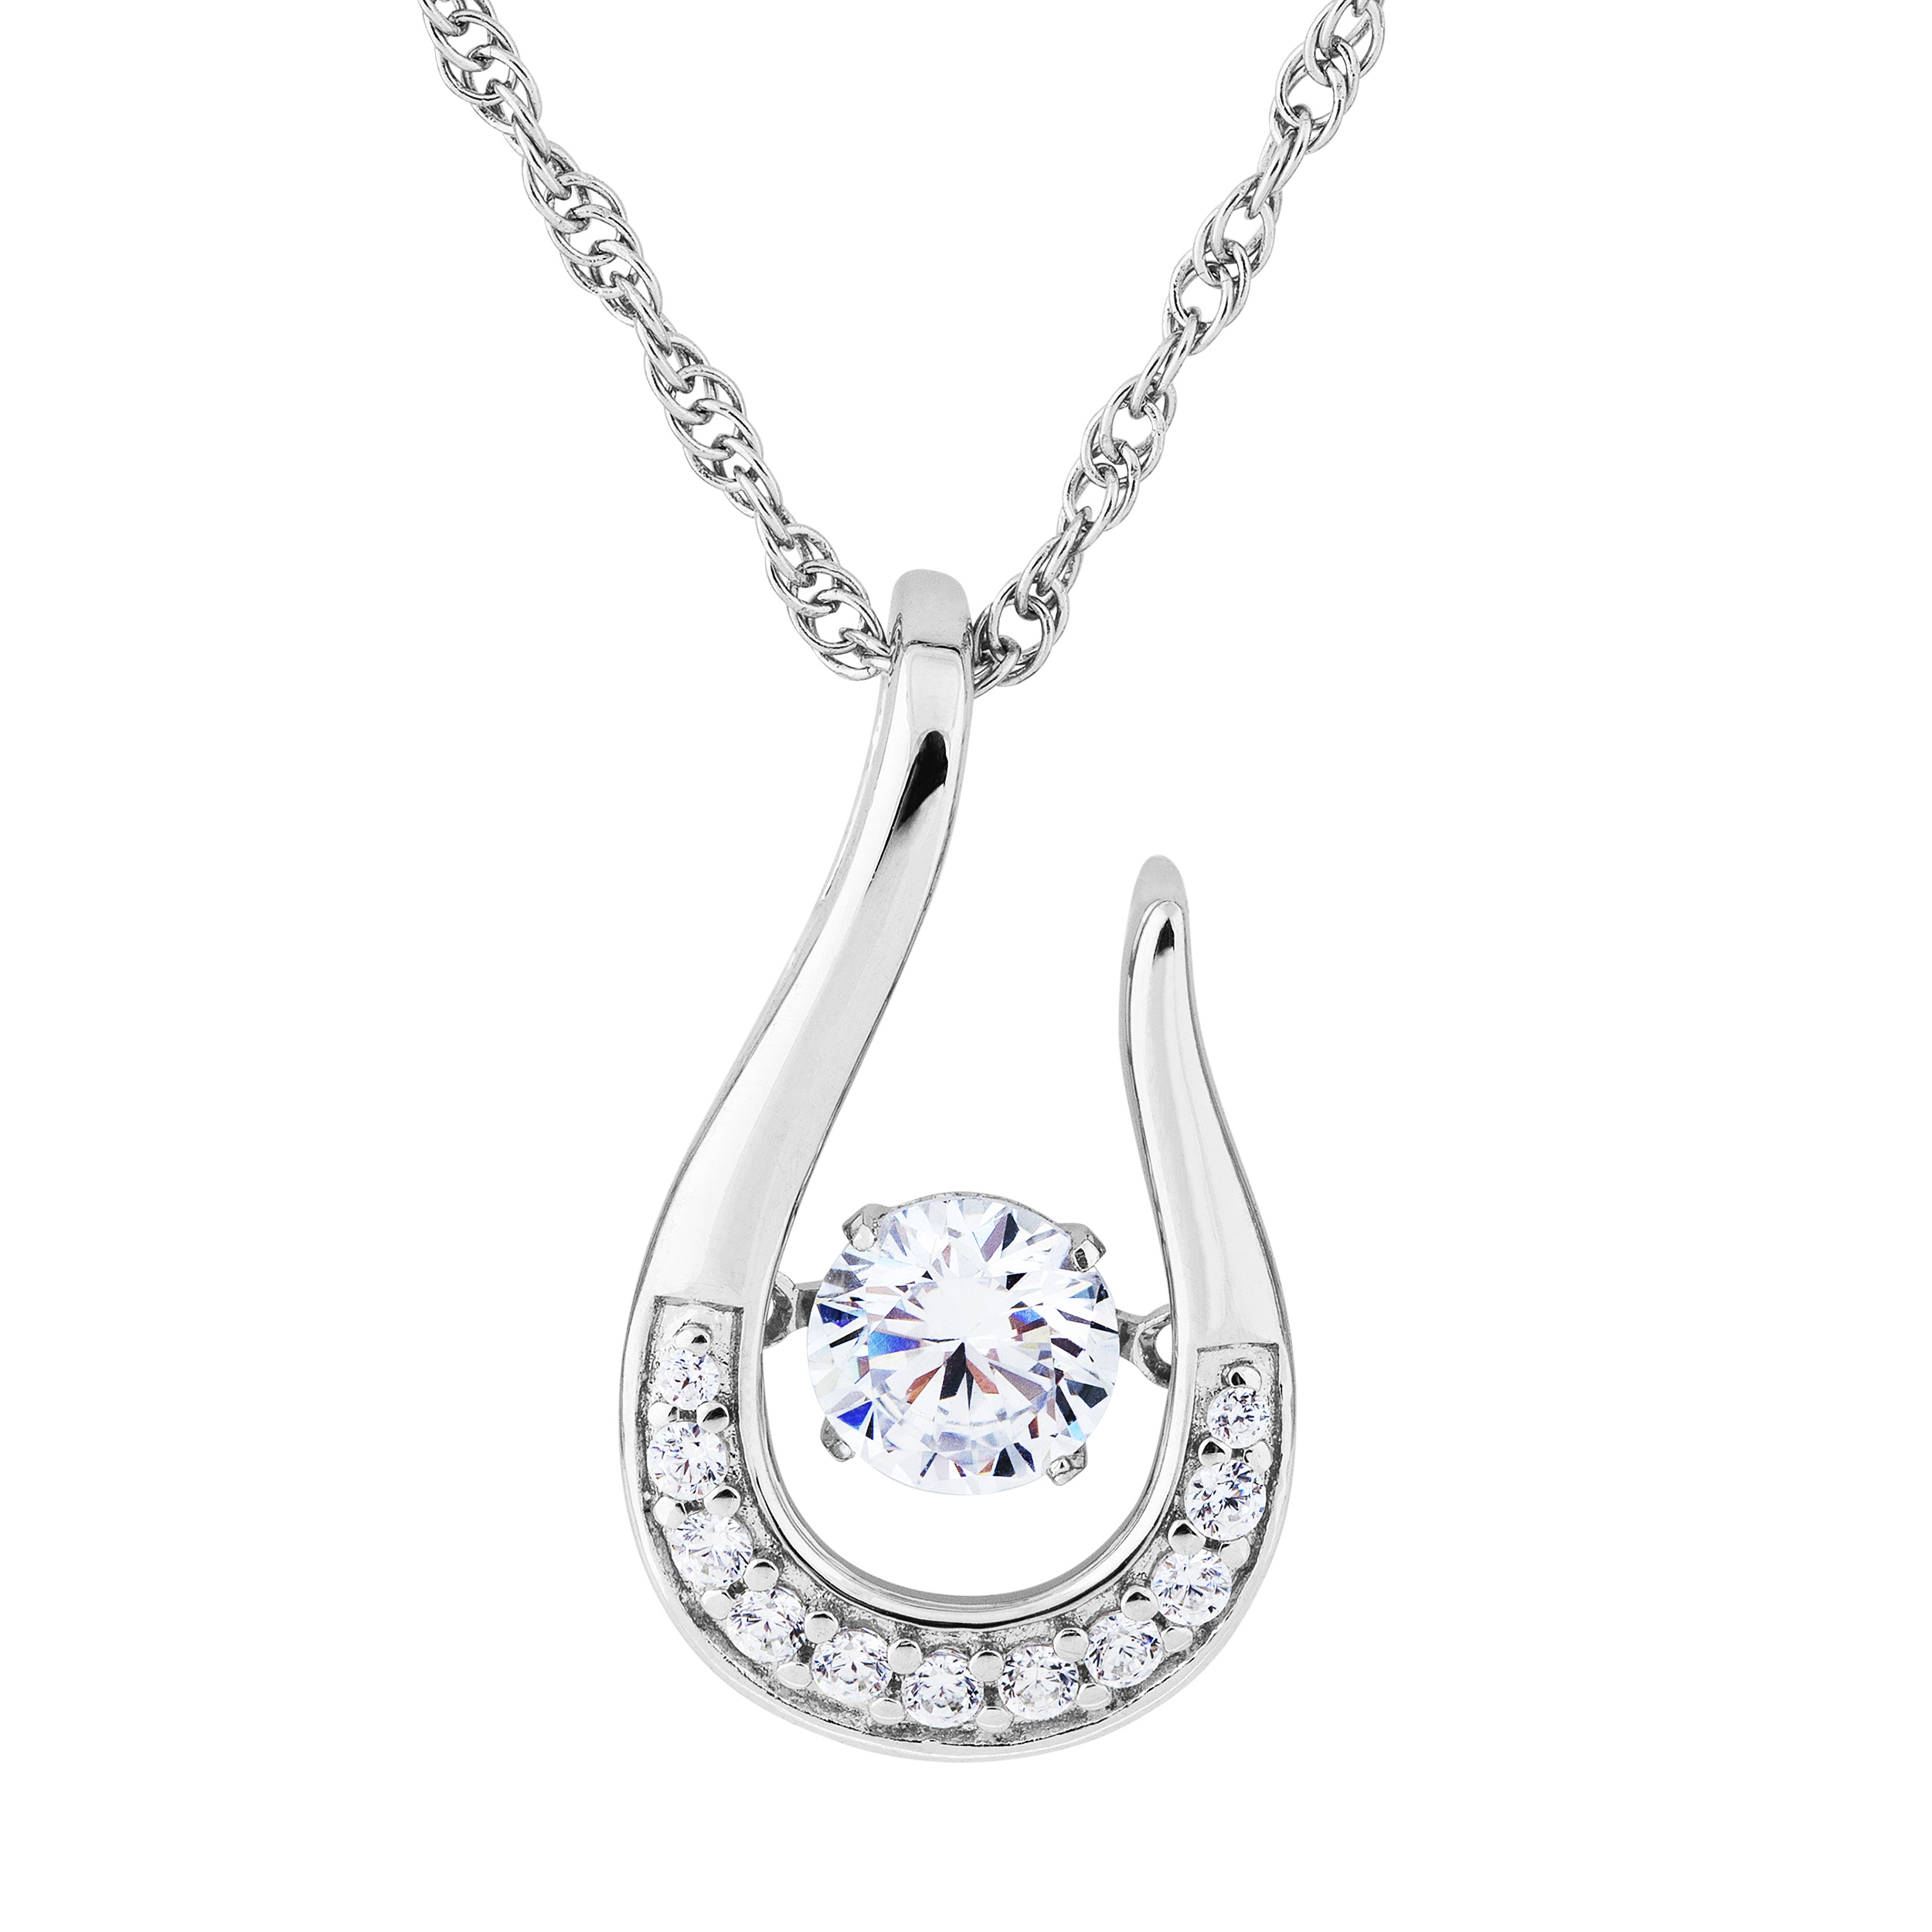 White Spinel CZ with Cubic Zirconia April Teardrop Pendant Necklace, Rhodium Plated Sterling Silver img title=